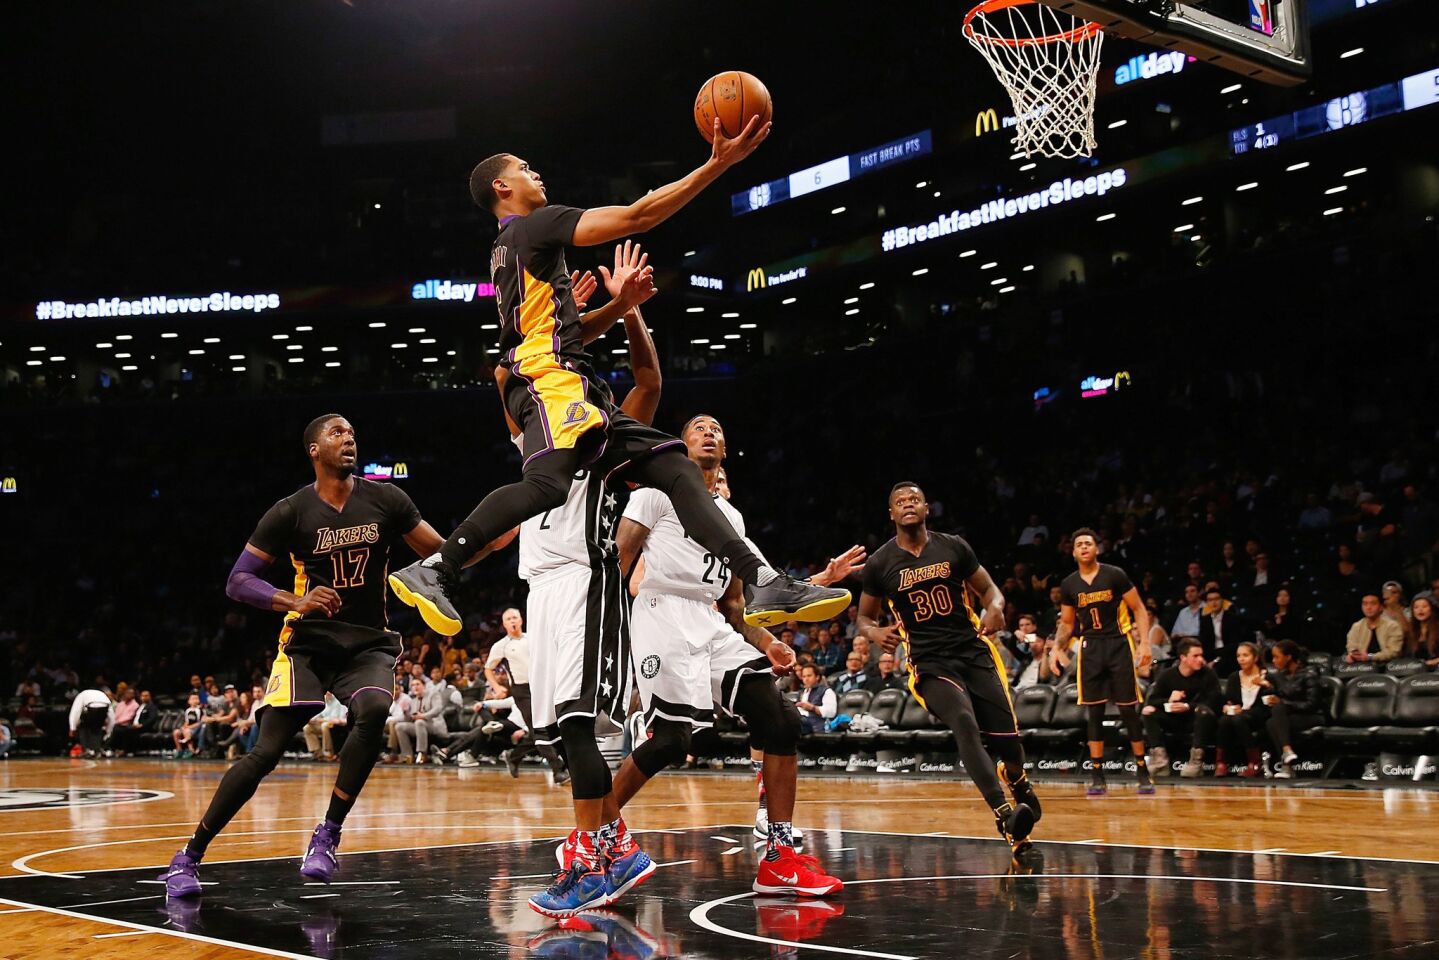 Los Angeles Lakers' Jordan Clarkson (6) attempts a basket against the Brooklyn Nets on Friday.